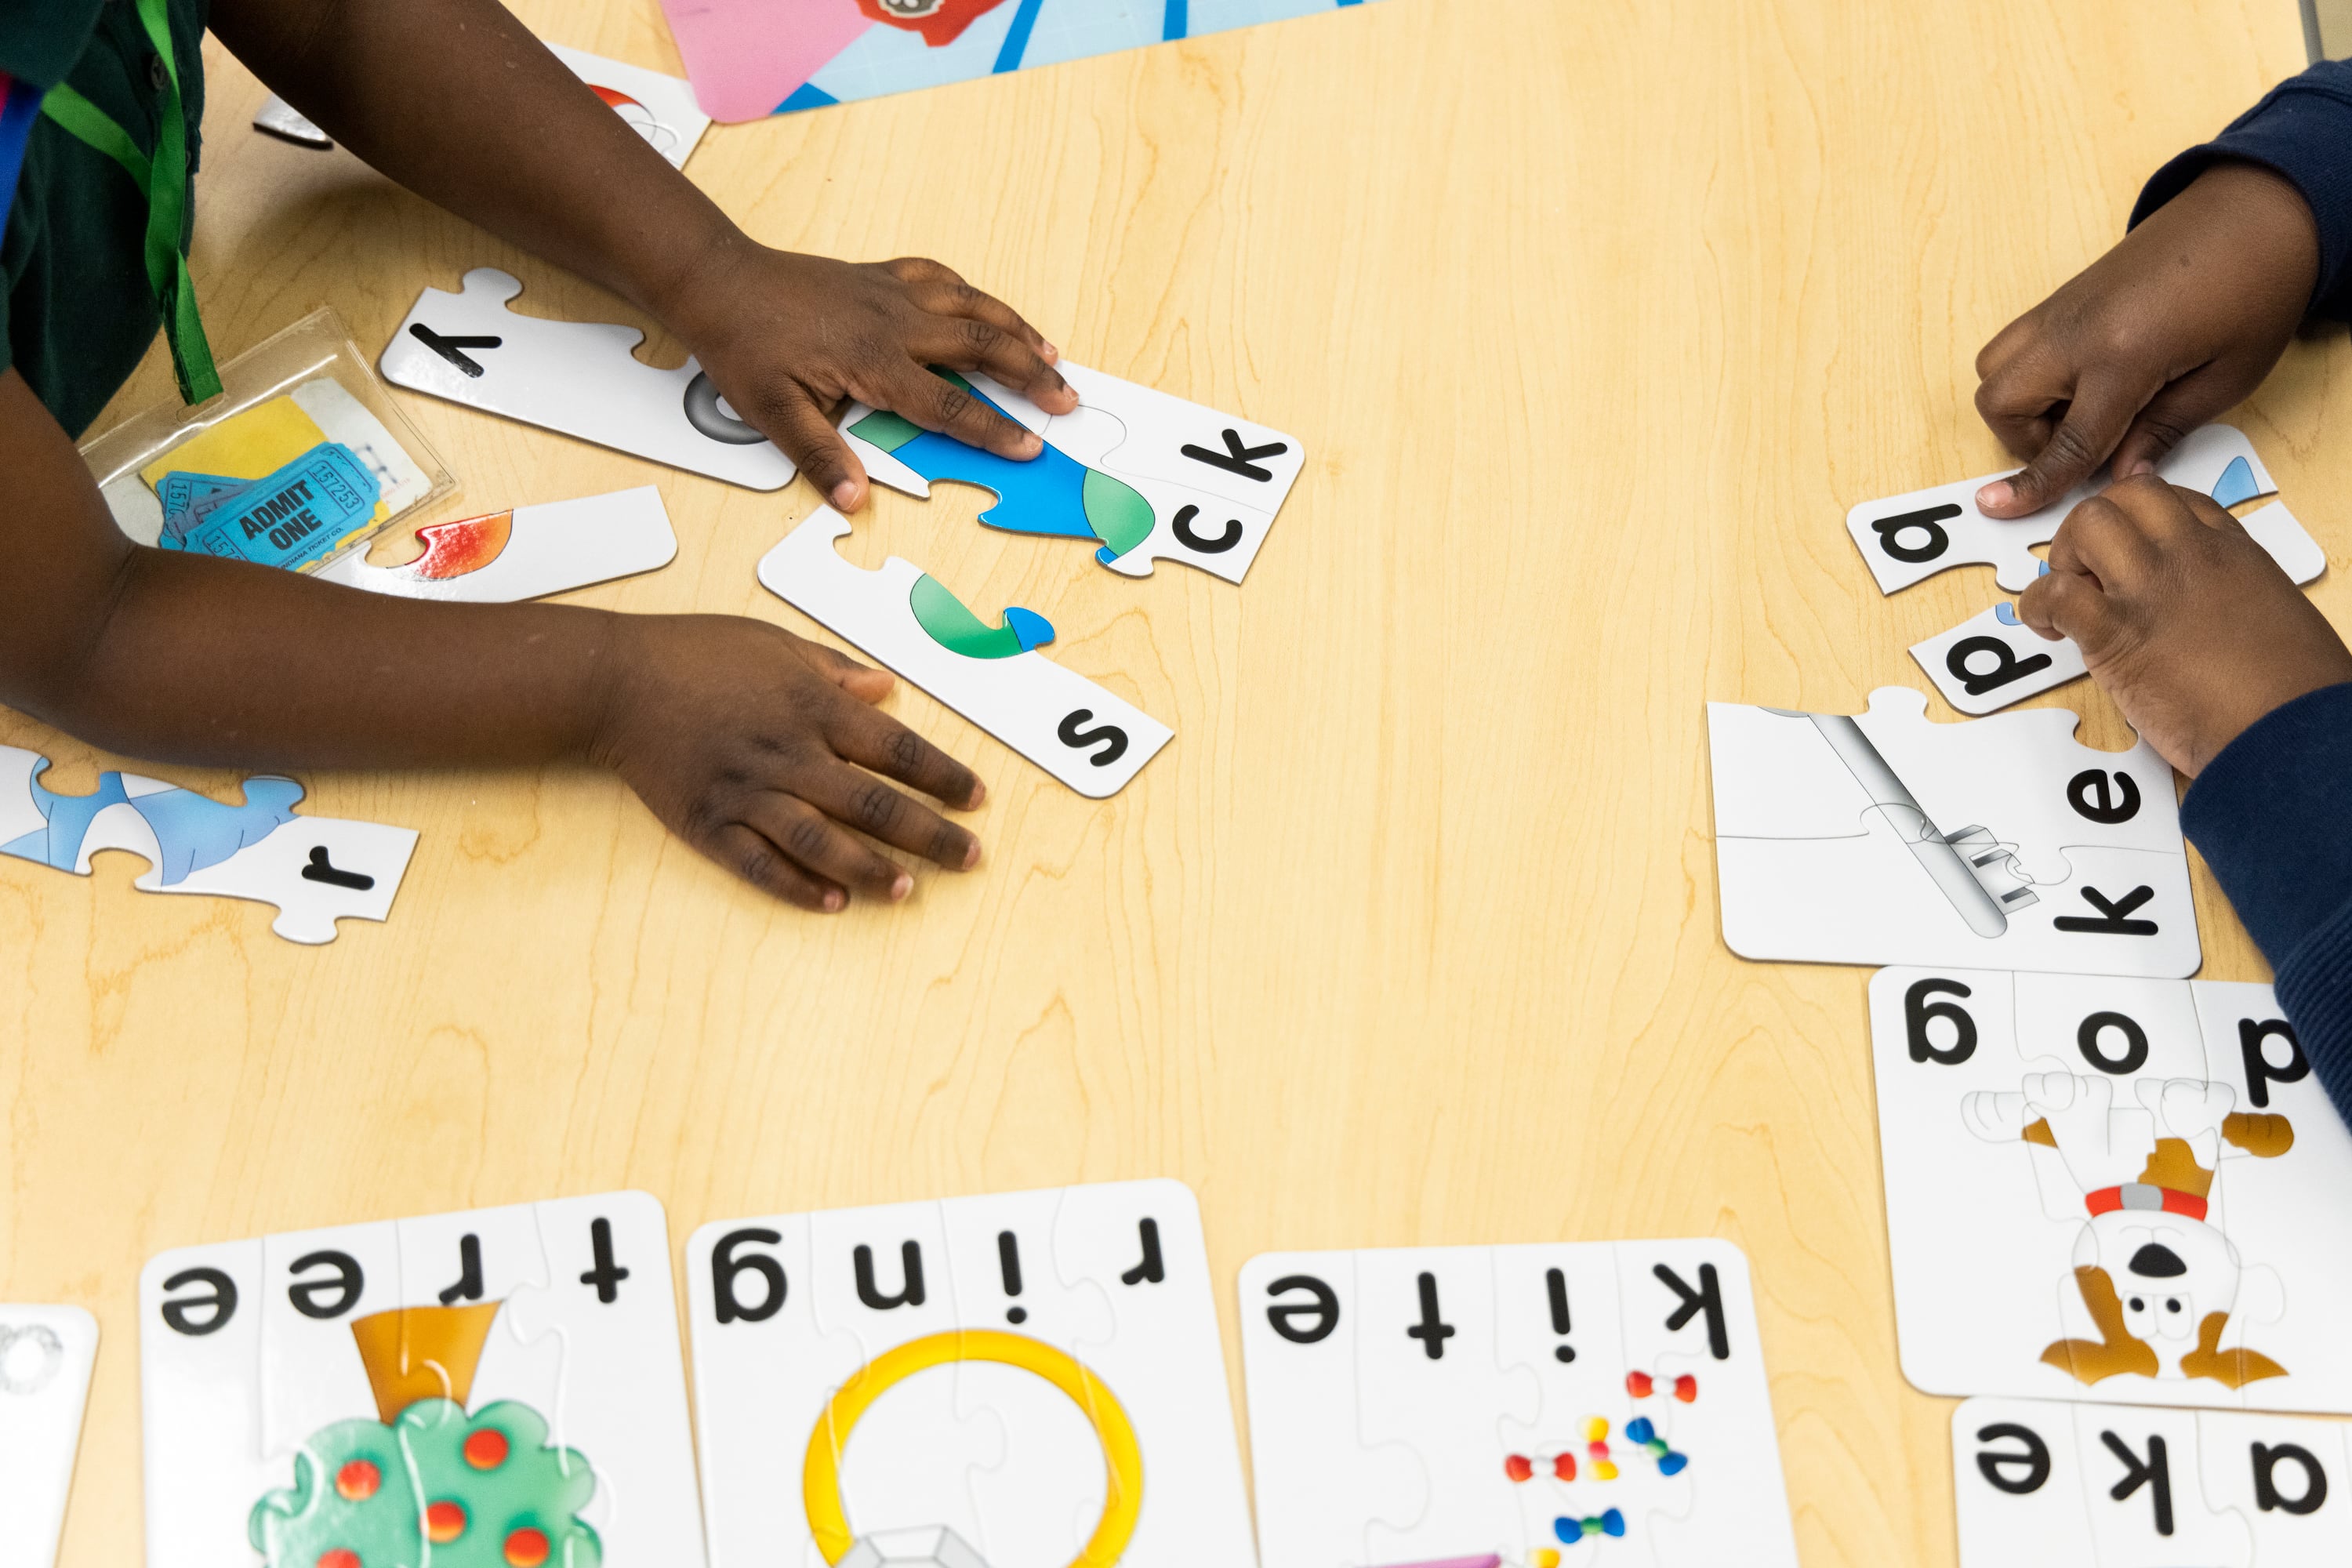 A close-up of children’s hands as they work on word puzzles.